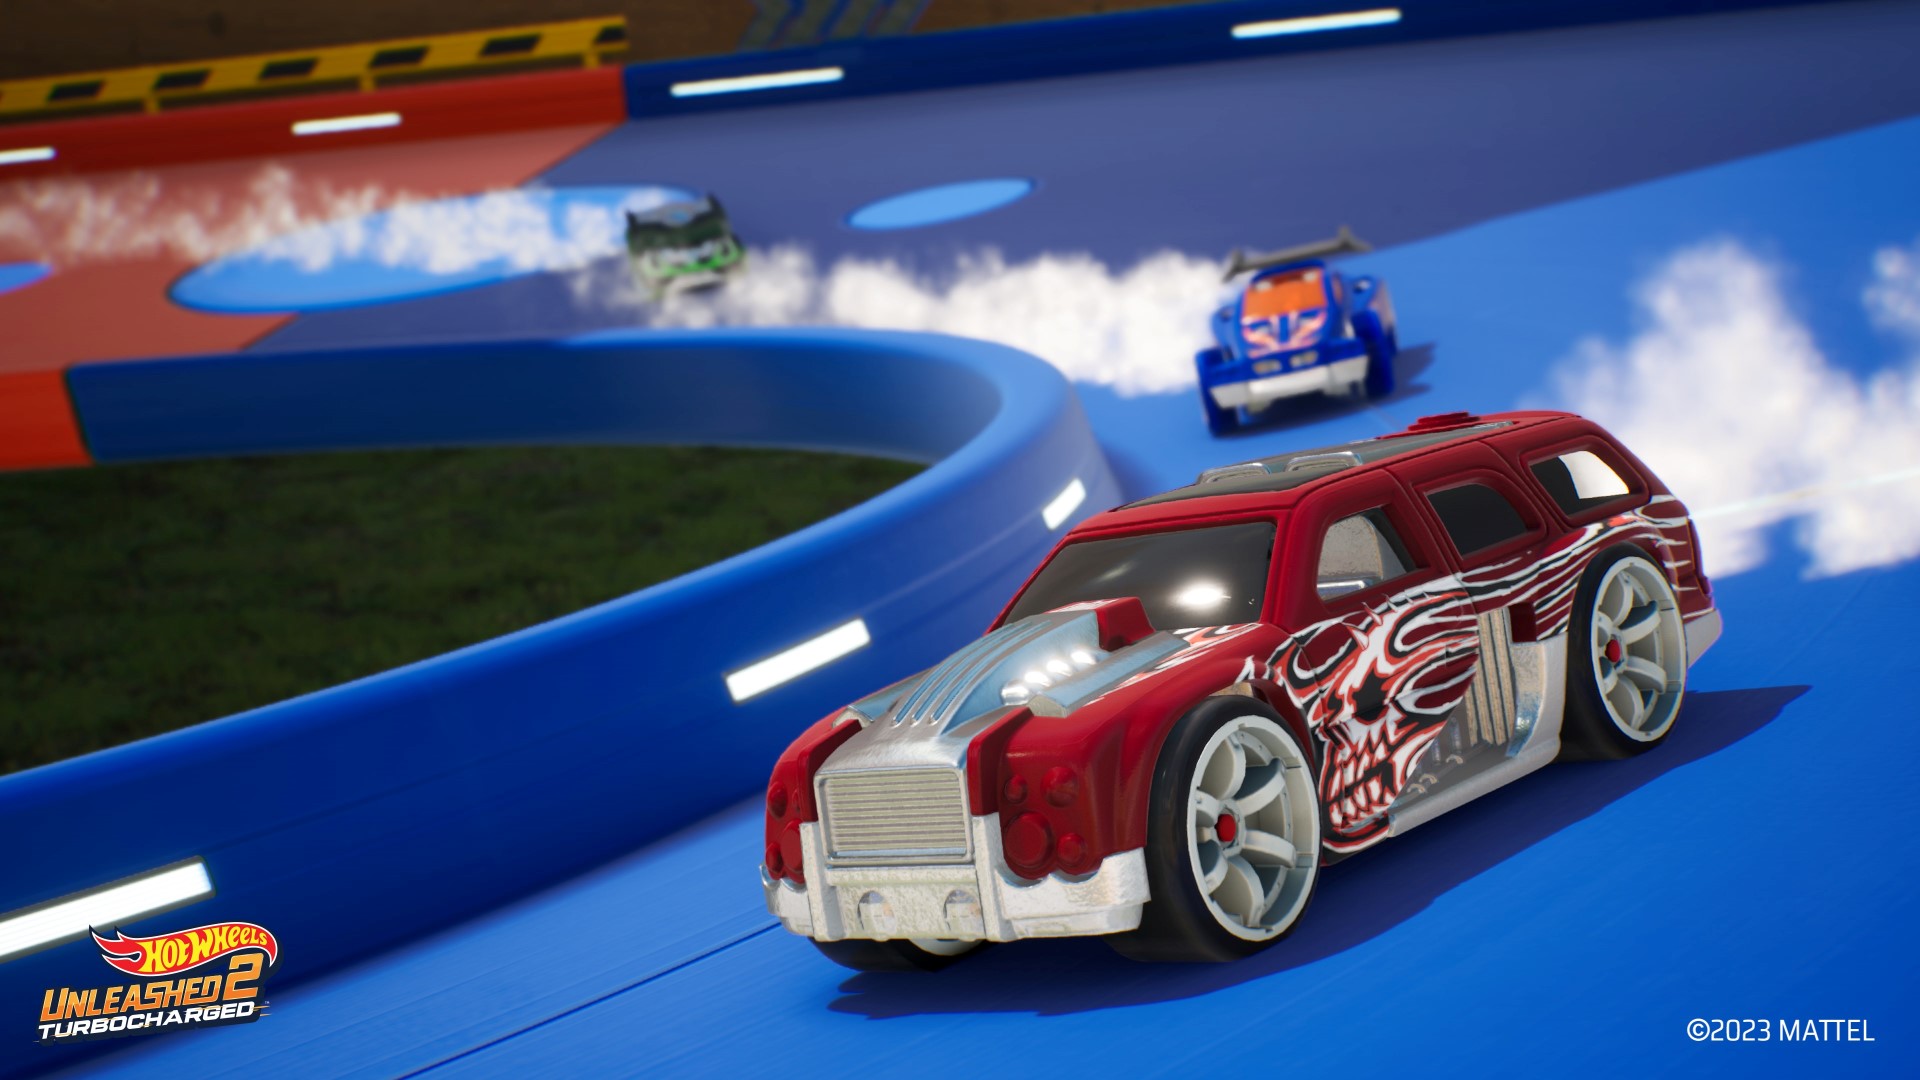 Hot Wheels Unleashed 2 - Turbocharged è il racing game tutto